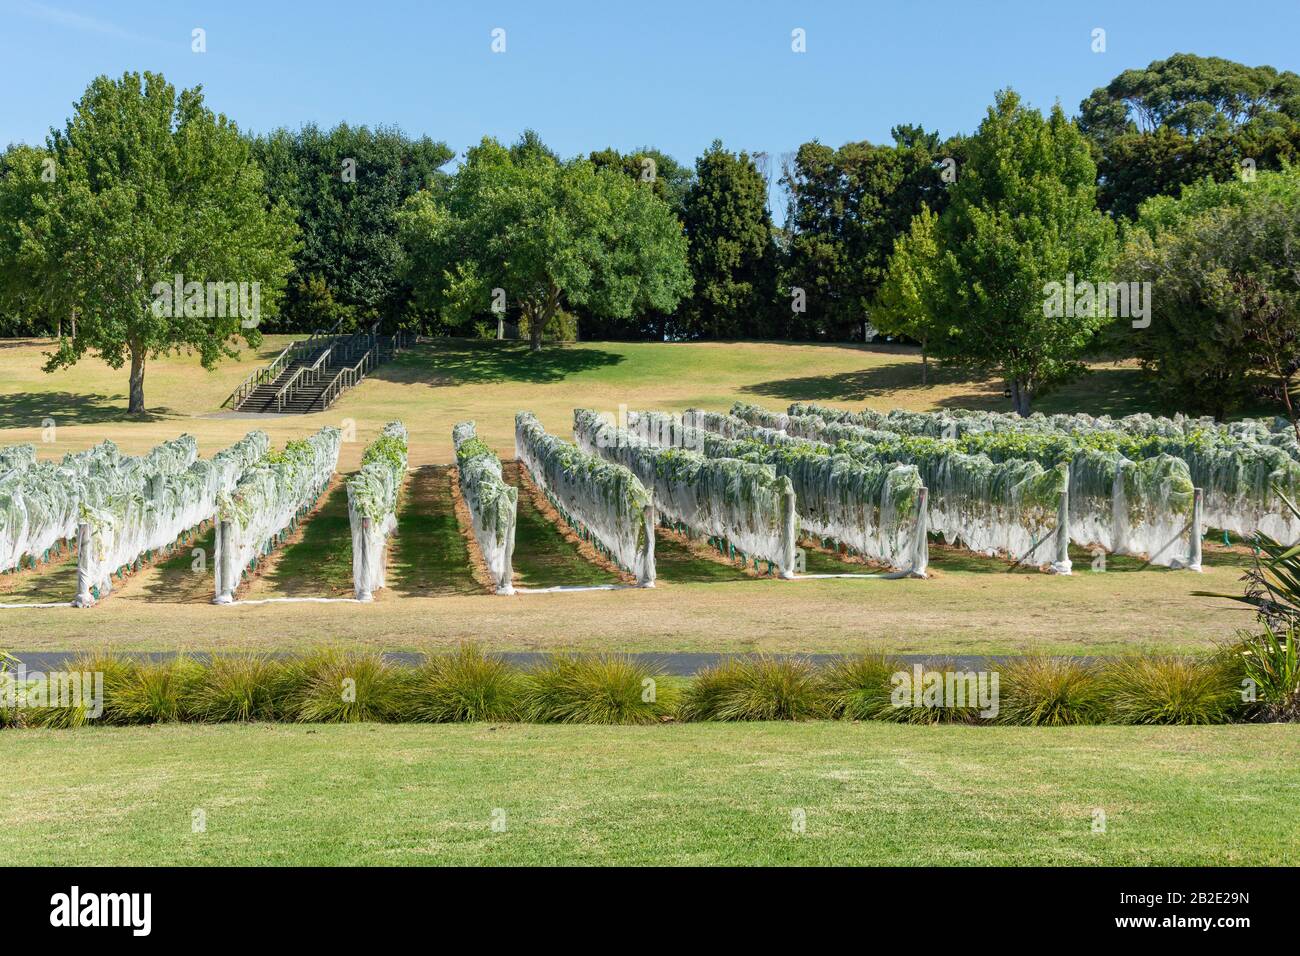 Rows of vines at Villa Maria Auckland Winery, Mangere, Auckland, Auckland Region, New Zealand Stock Photo